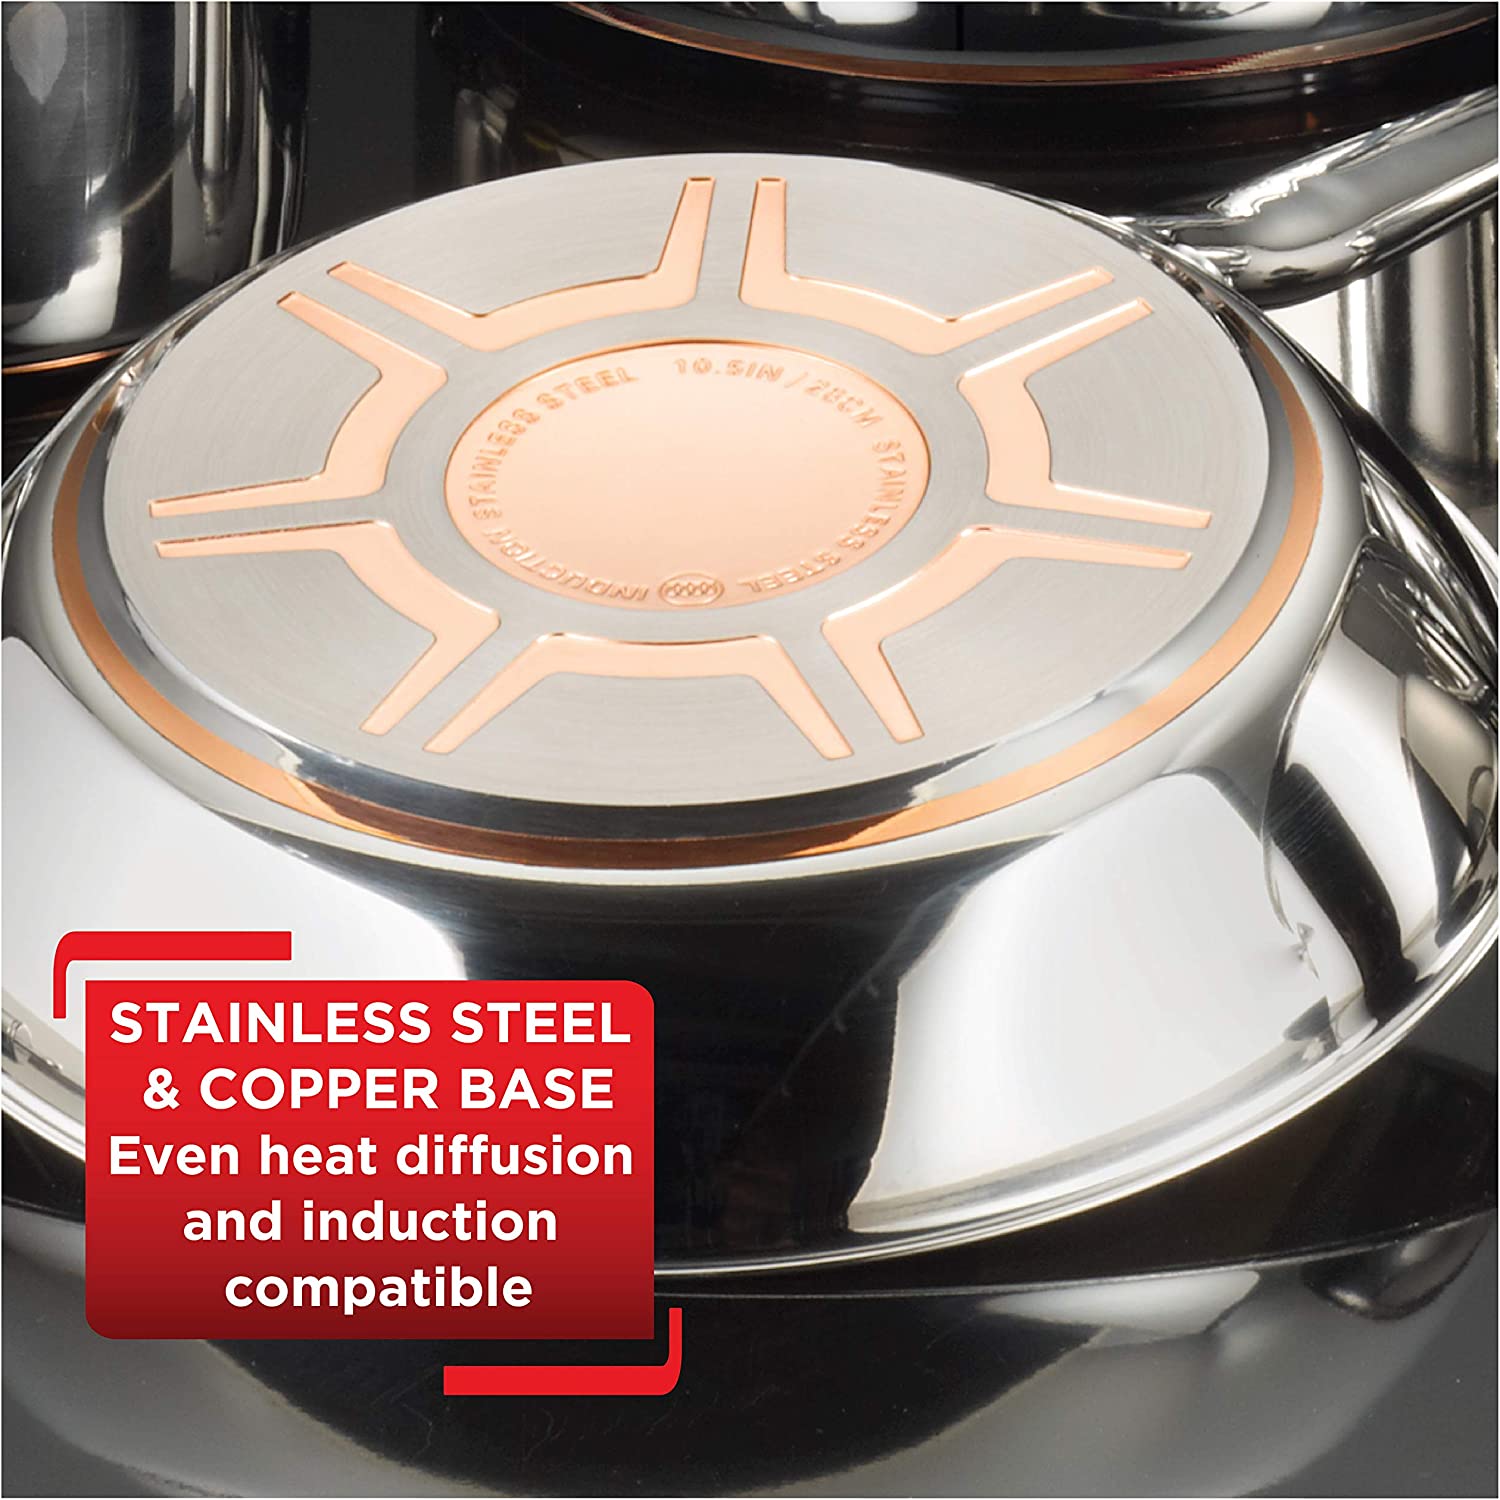 https://discounttoday.net/wp-content/uploads/2023/01/T-fal-C836SD-Ultimate-Stainless-Steel-Copper-Bottom-13-PC-Cookware-Set-Piece-Silver4.jpg